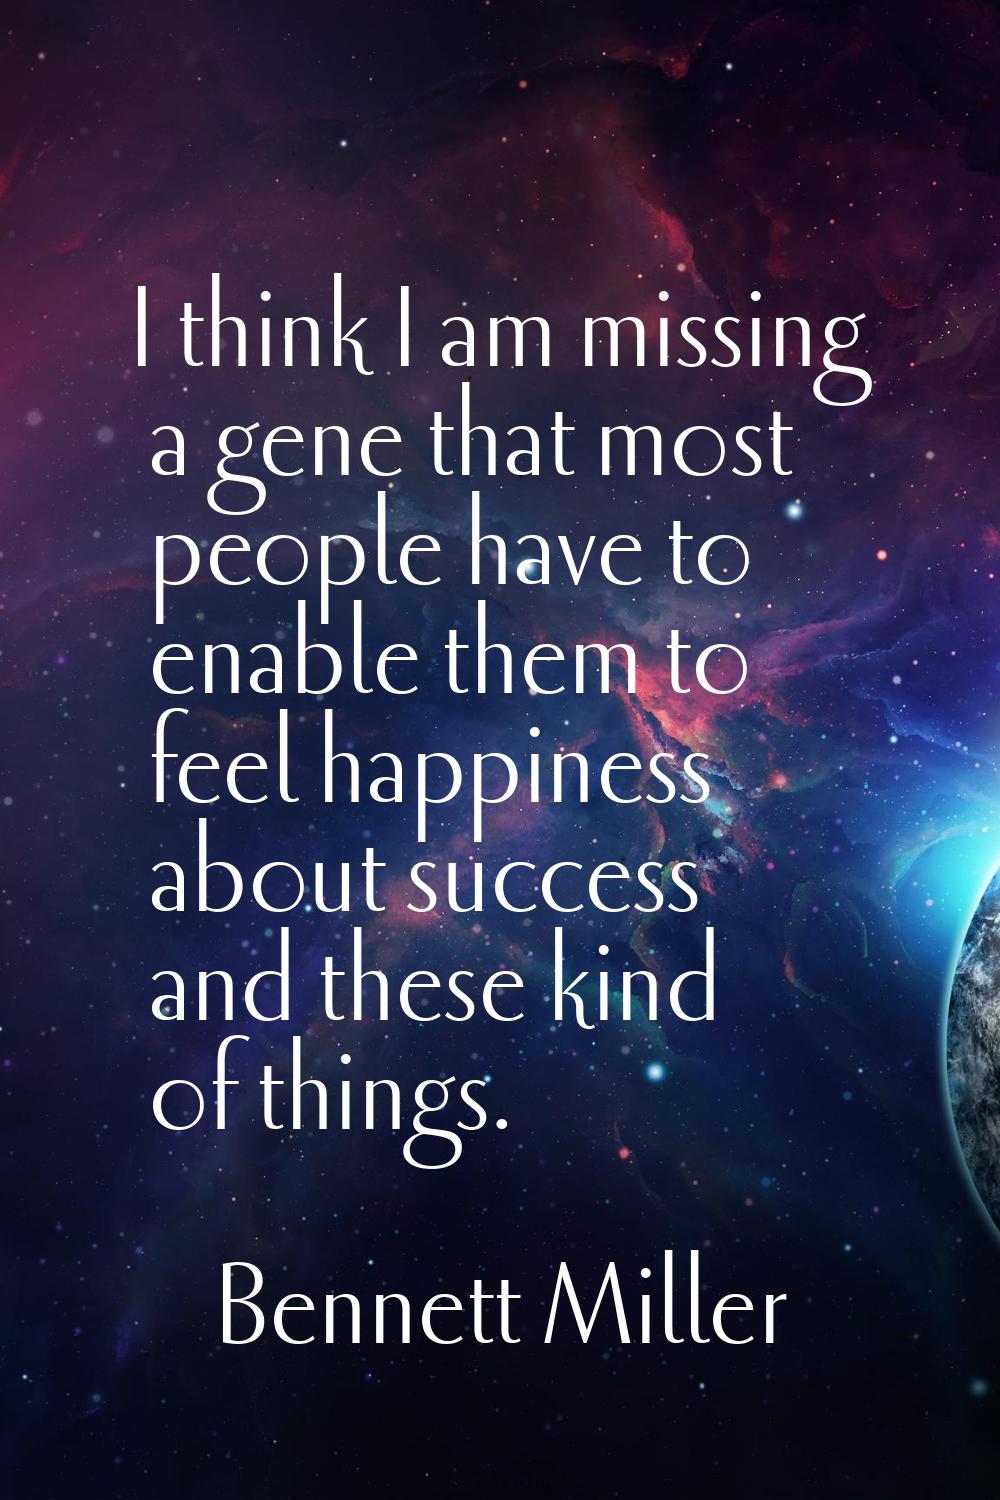 I think I am missing a gene that most people have to enable them to feel happiness about success an